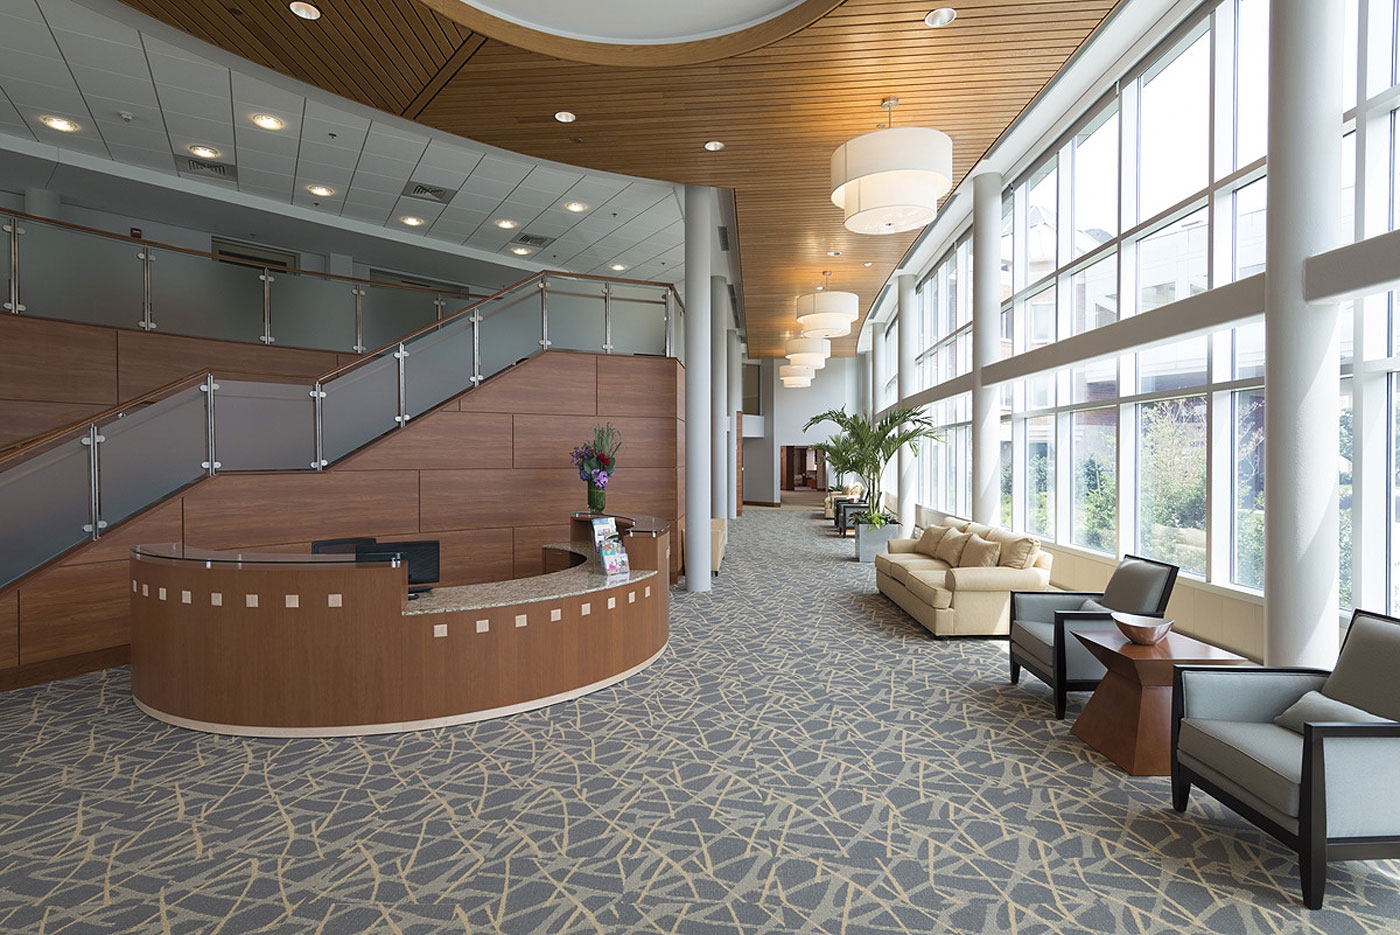 Our interior design highlights natural light in this lobby of a CCRC